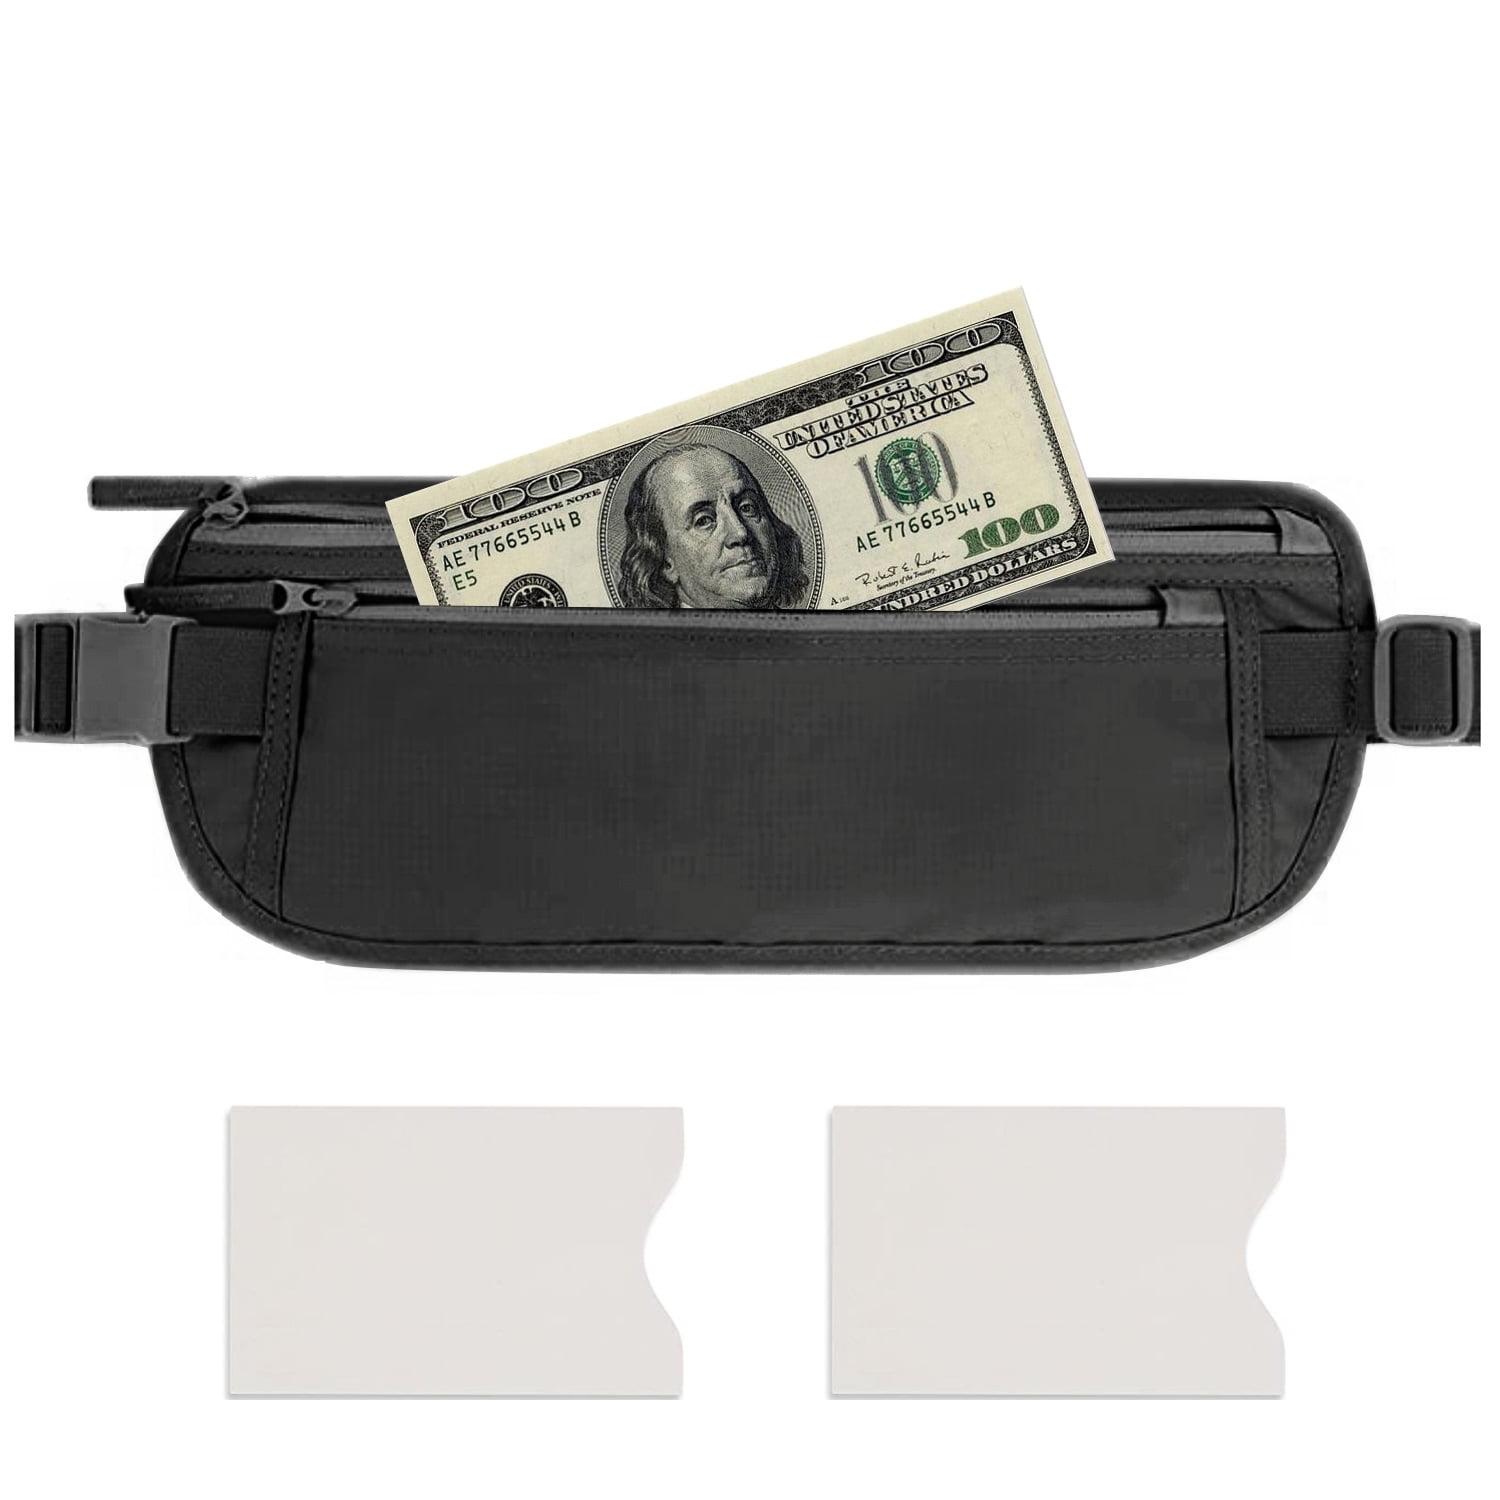 Hidden money Ultra Slim Belt Waist Pack,For Travel With RFID Blocking Sleeves Set for Daily Use black 